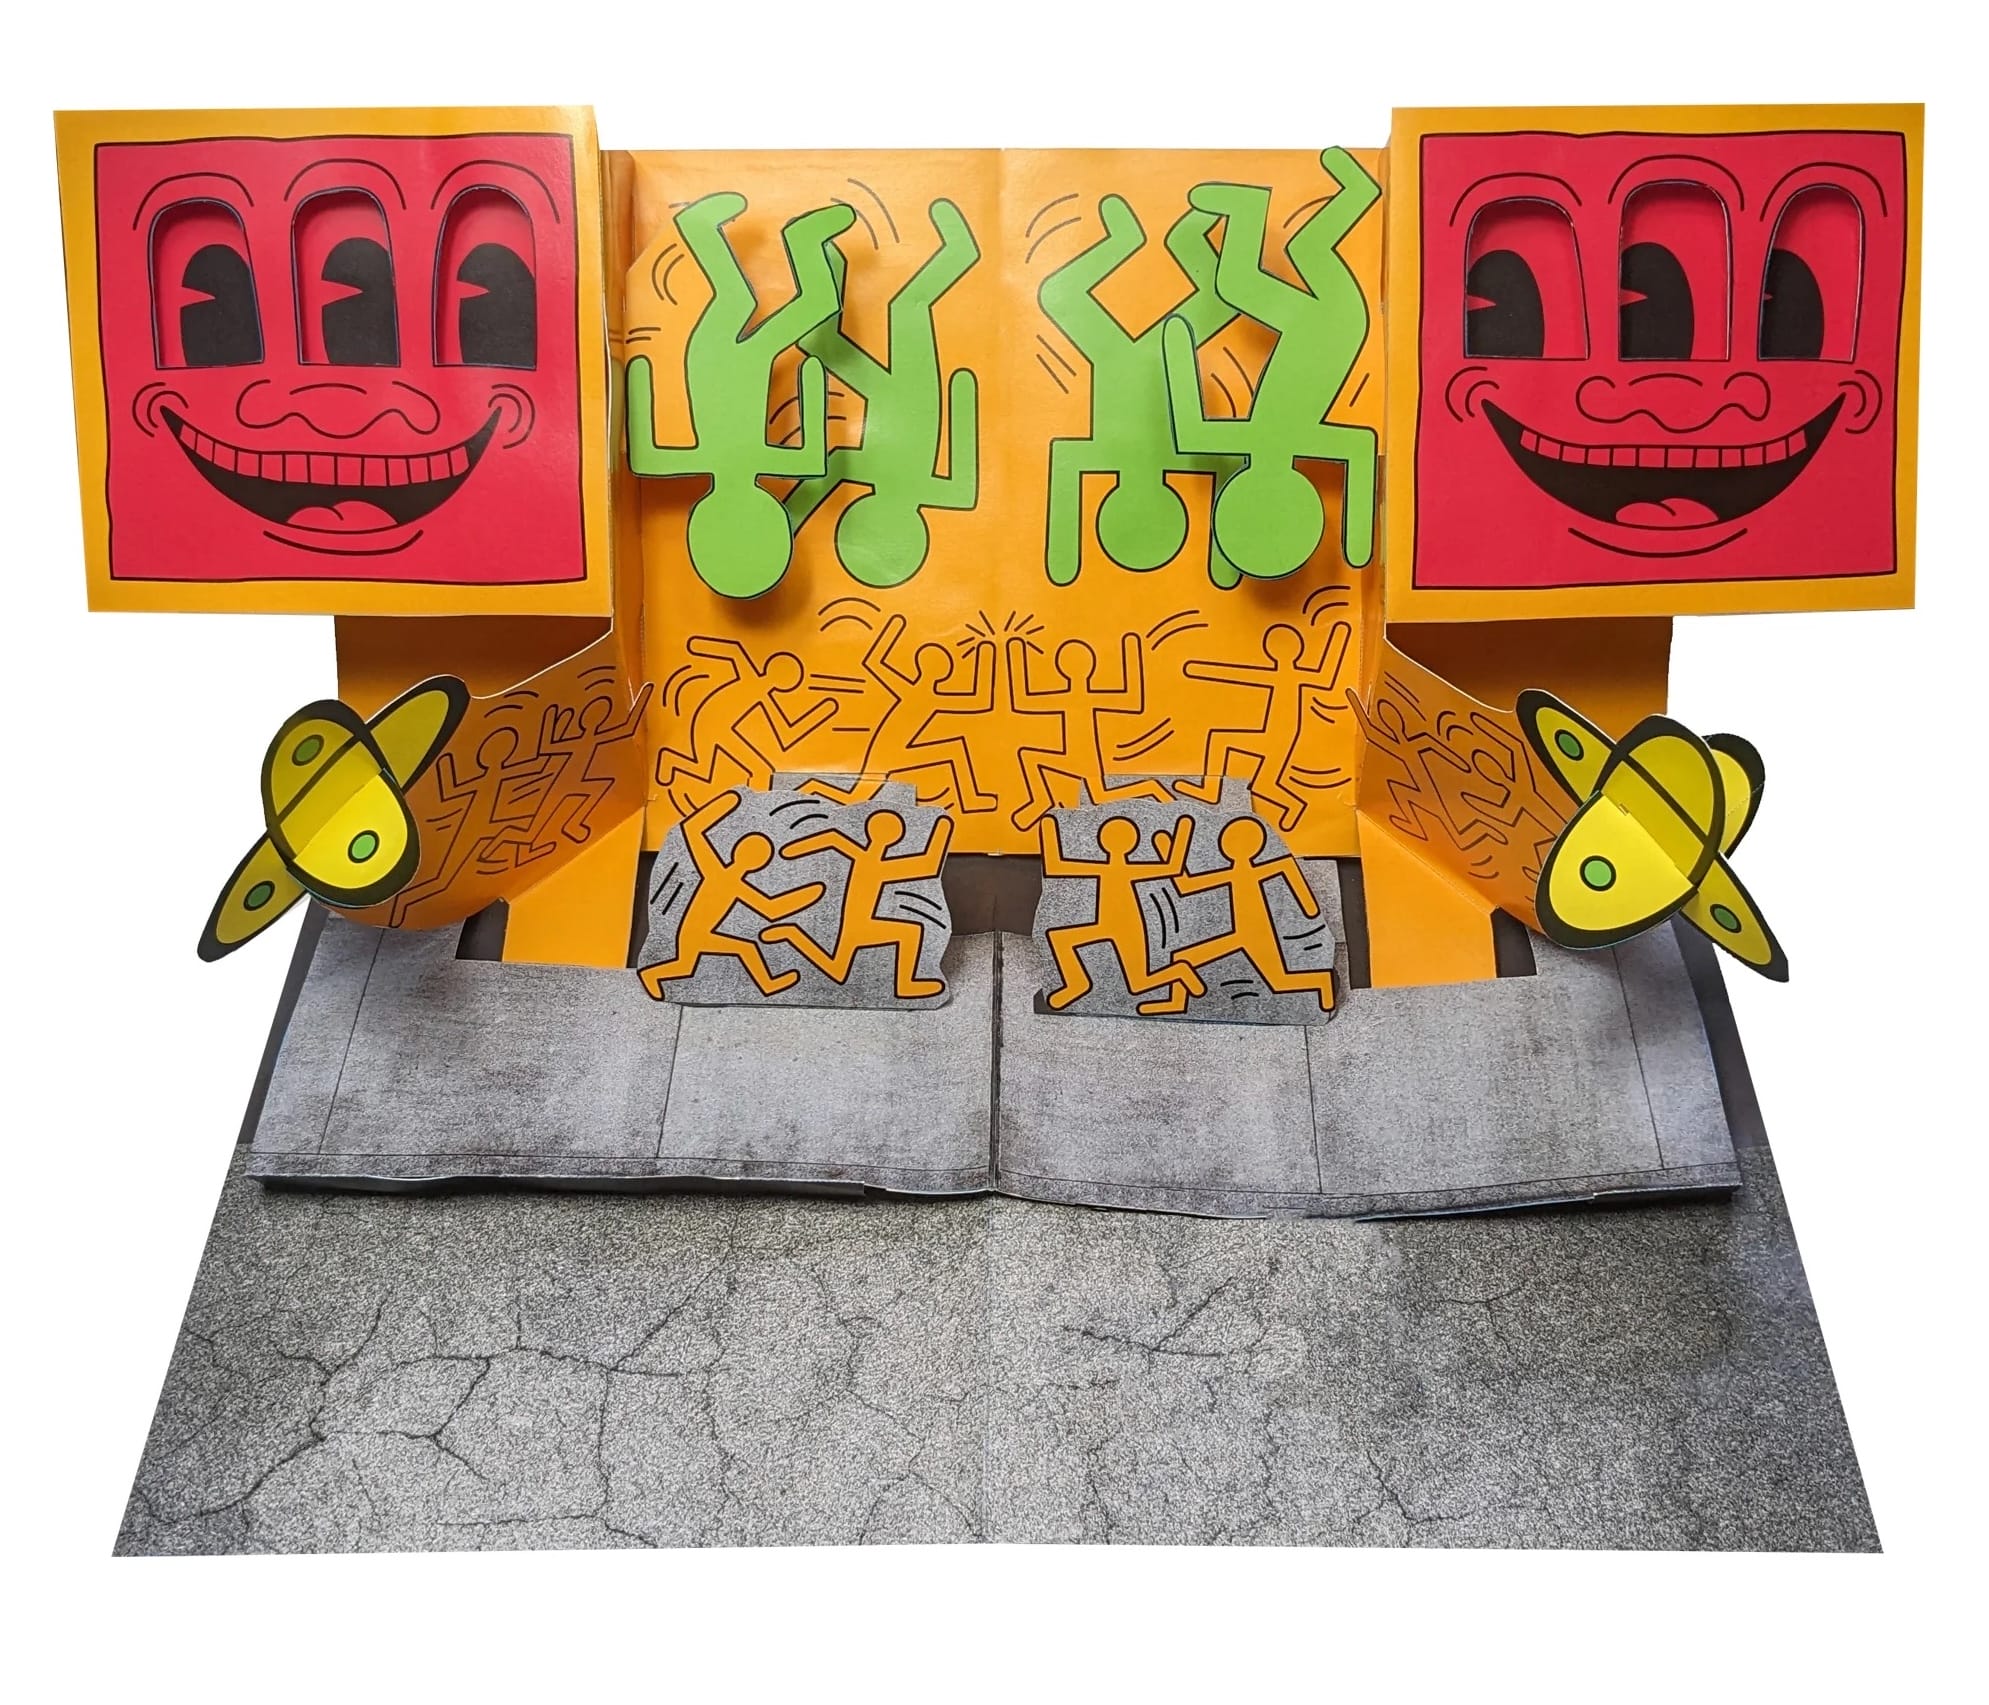 a pop-up paper spread from a pop-up book of artwork by Keith Haring, this piece depicting a recreation of a street mural with smiley faces that have three eyes, upside-down green dancing figures, planets, and tiny running figures in orange